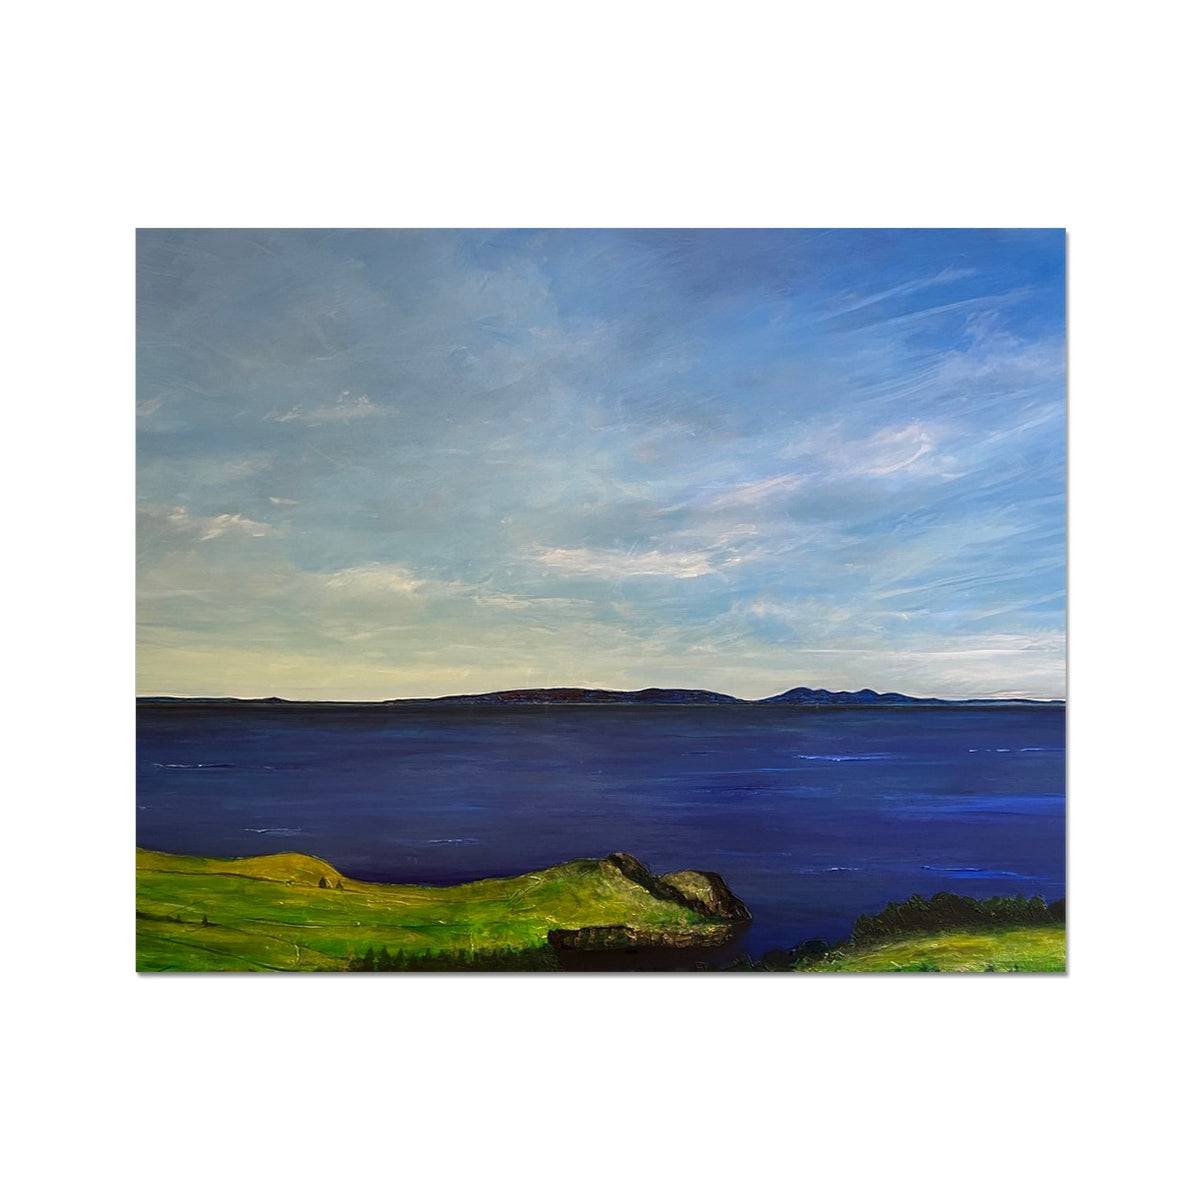 From Ireland To Scotland Painting | Artist Proof Collector Prints From Scotland-Artist Proof Collector Prints-World Art Gallery-20"x16"-Paintings, Prints, Homeware, Art Gifts From Scotland By Scottish Artist Kevin Hunter